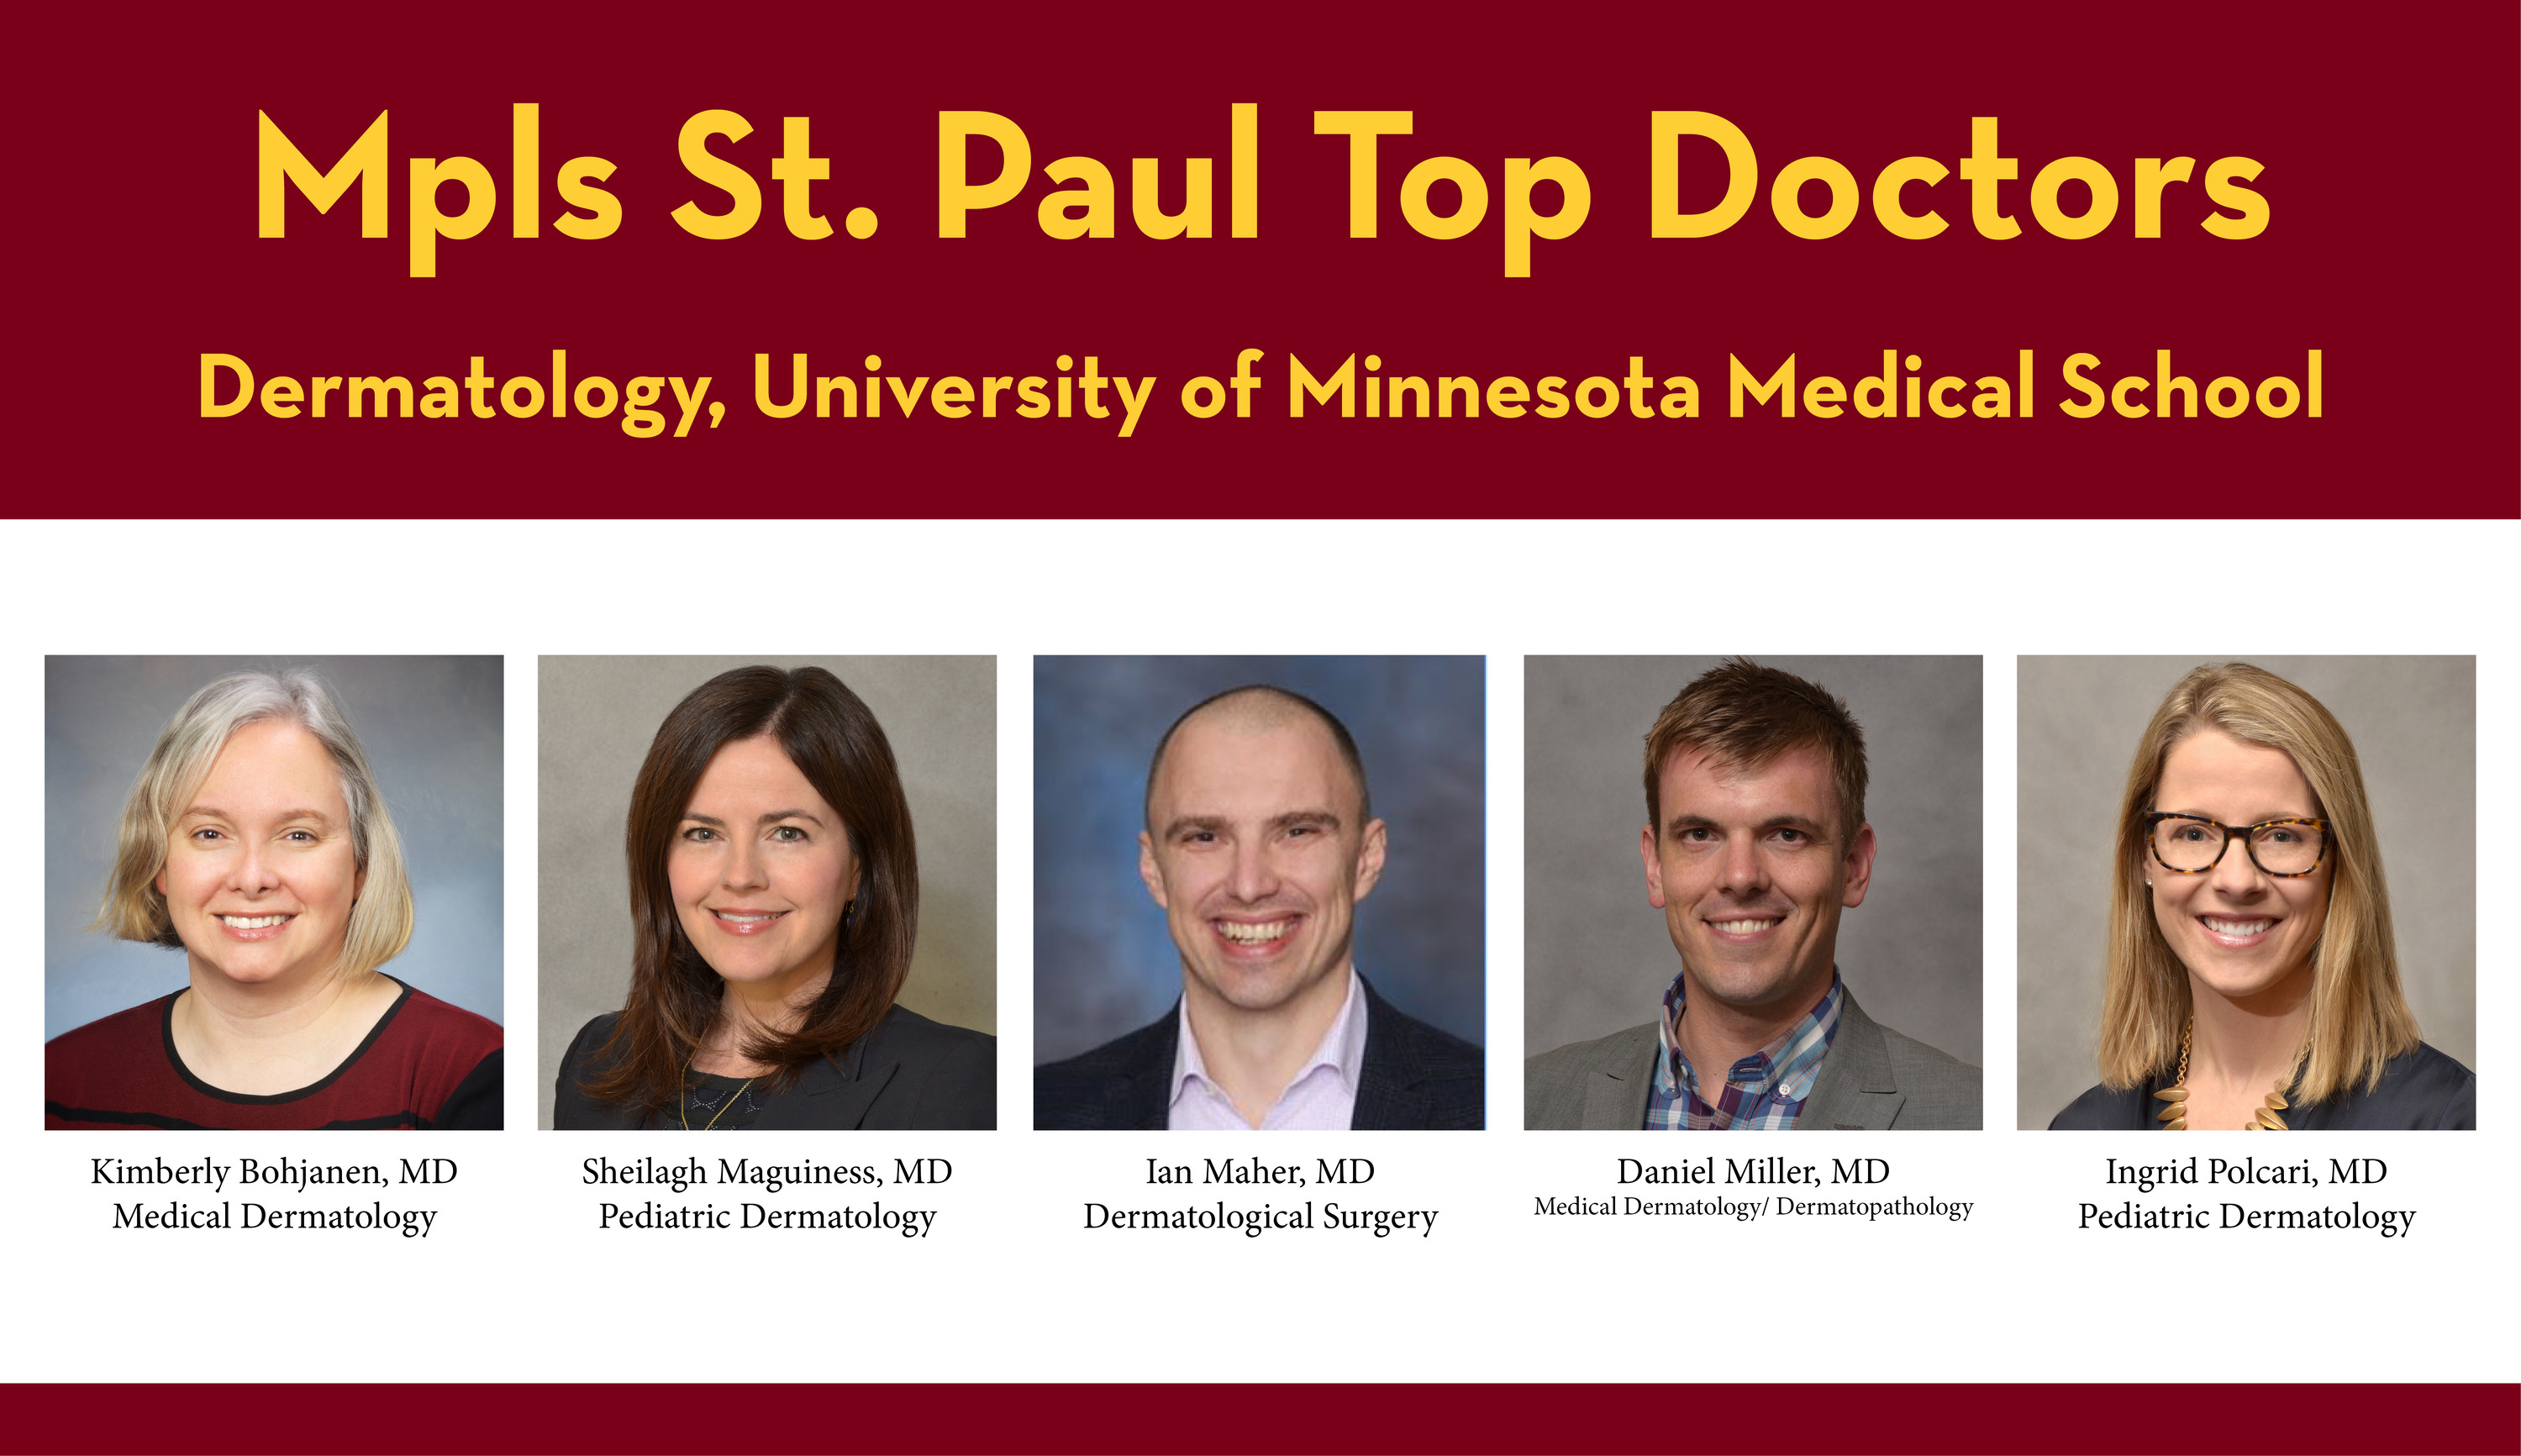 mpls_st_paul_top_doctor